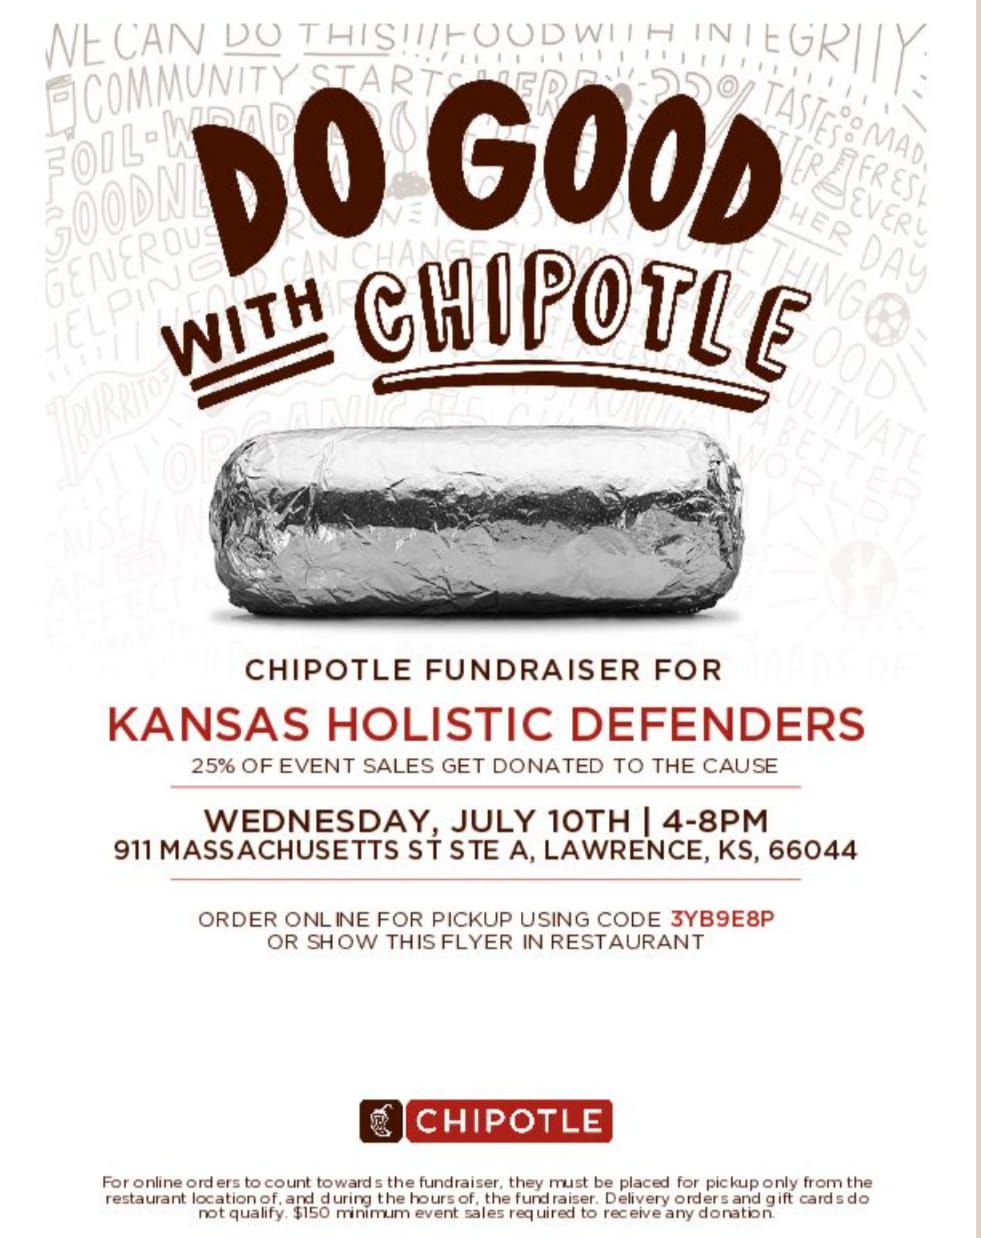 Chipotle Fundraiser for KHD